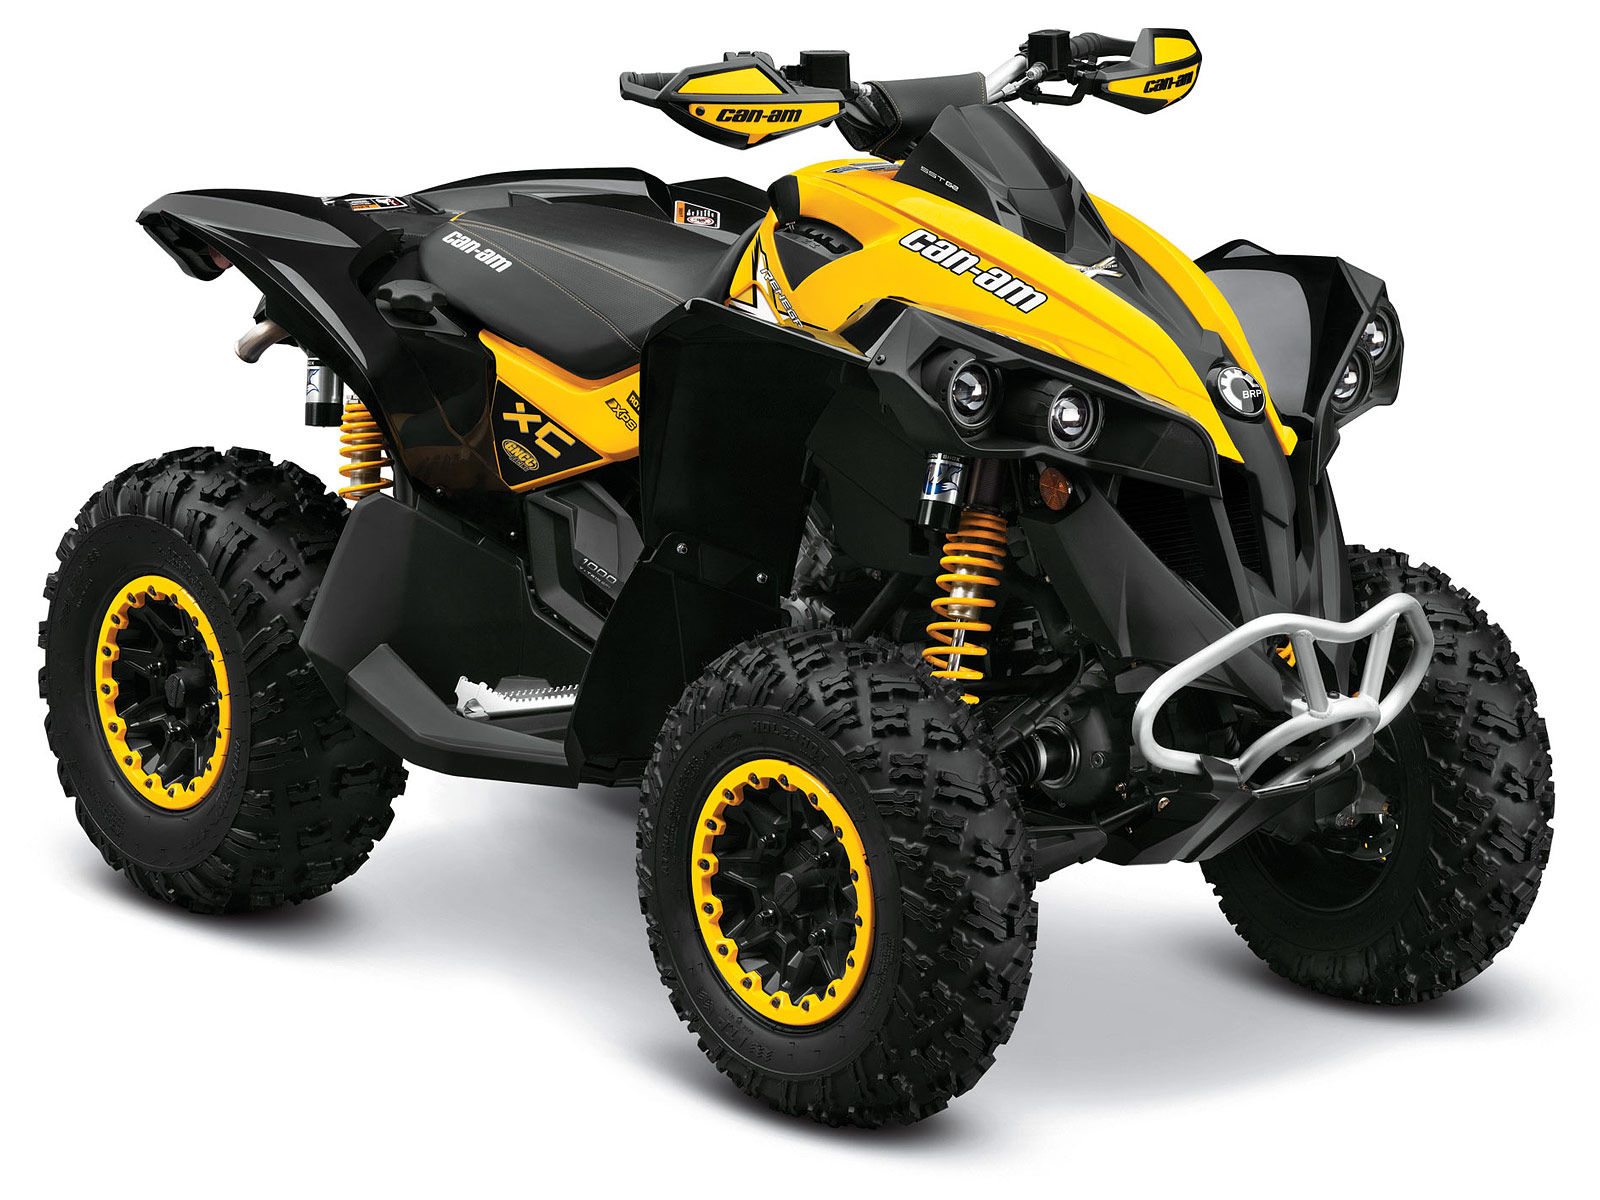 Usa Canada Specifications 2013 Can Am Renegade Xxc 1000 ATV